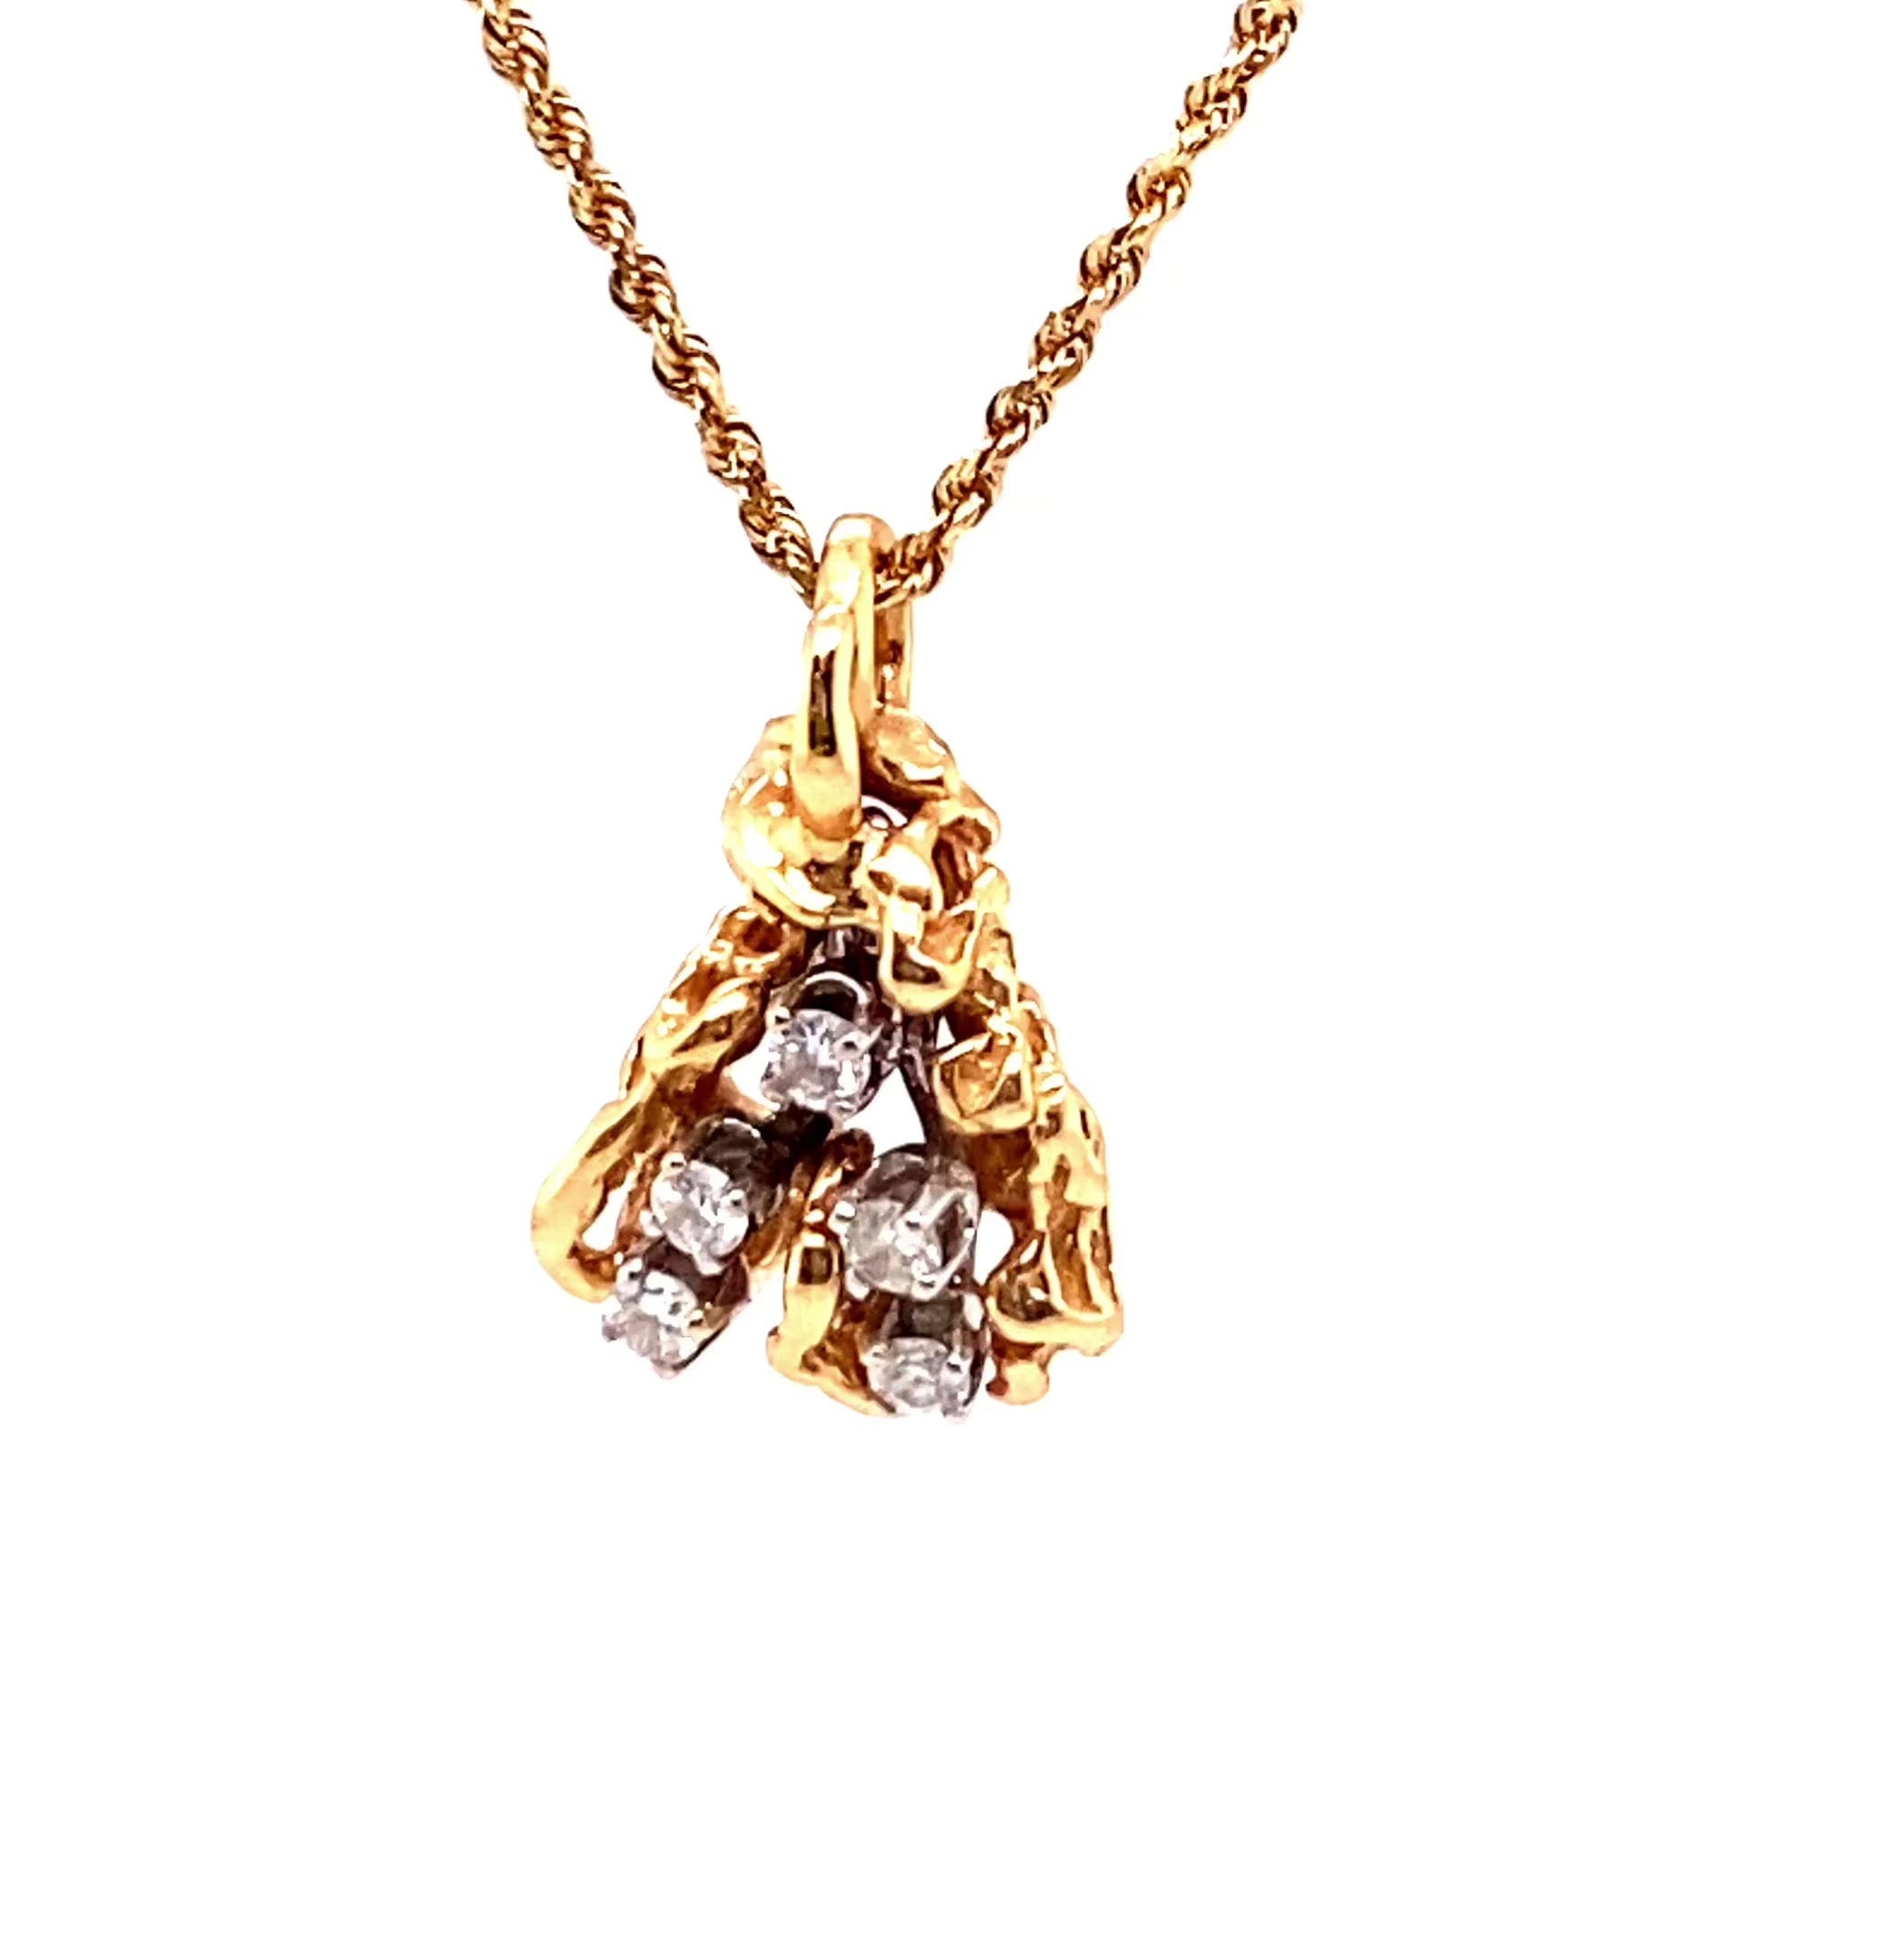 Natural Diamond Necklace 14K Solid Gold .40tcw Pendant Necklace Nugget Pendant Cluster Pendant Estate Jewelry Vintage Necklace Fine Jewelry